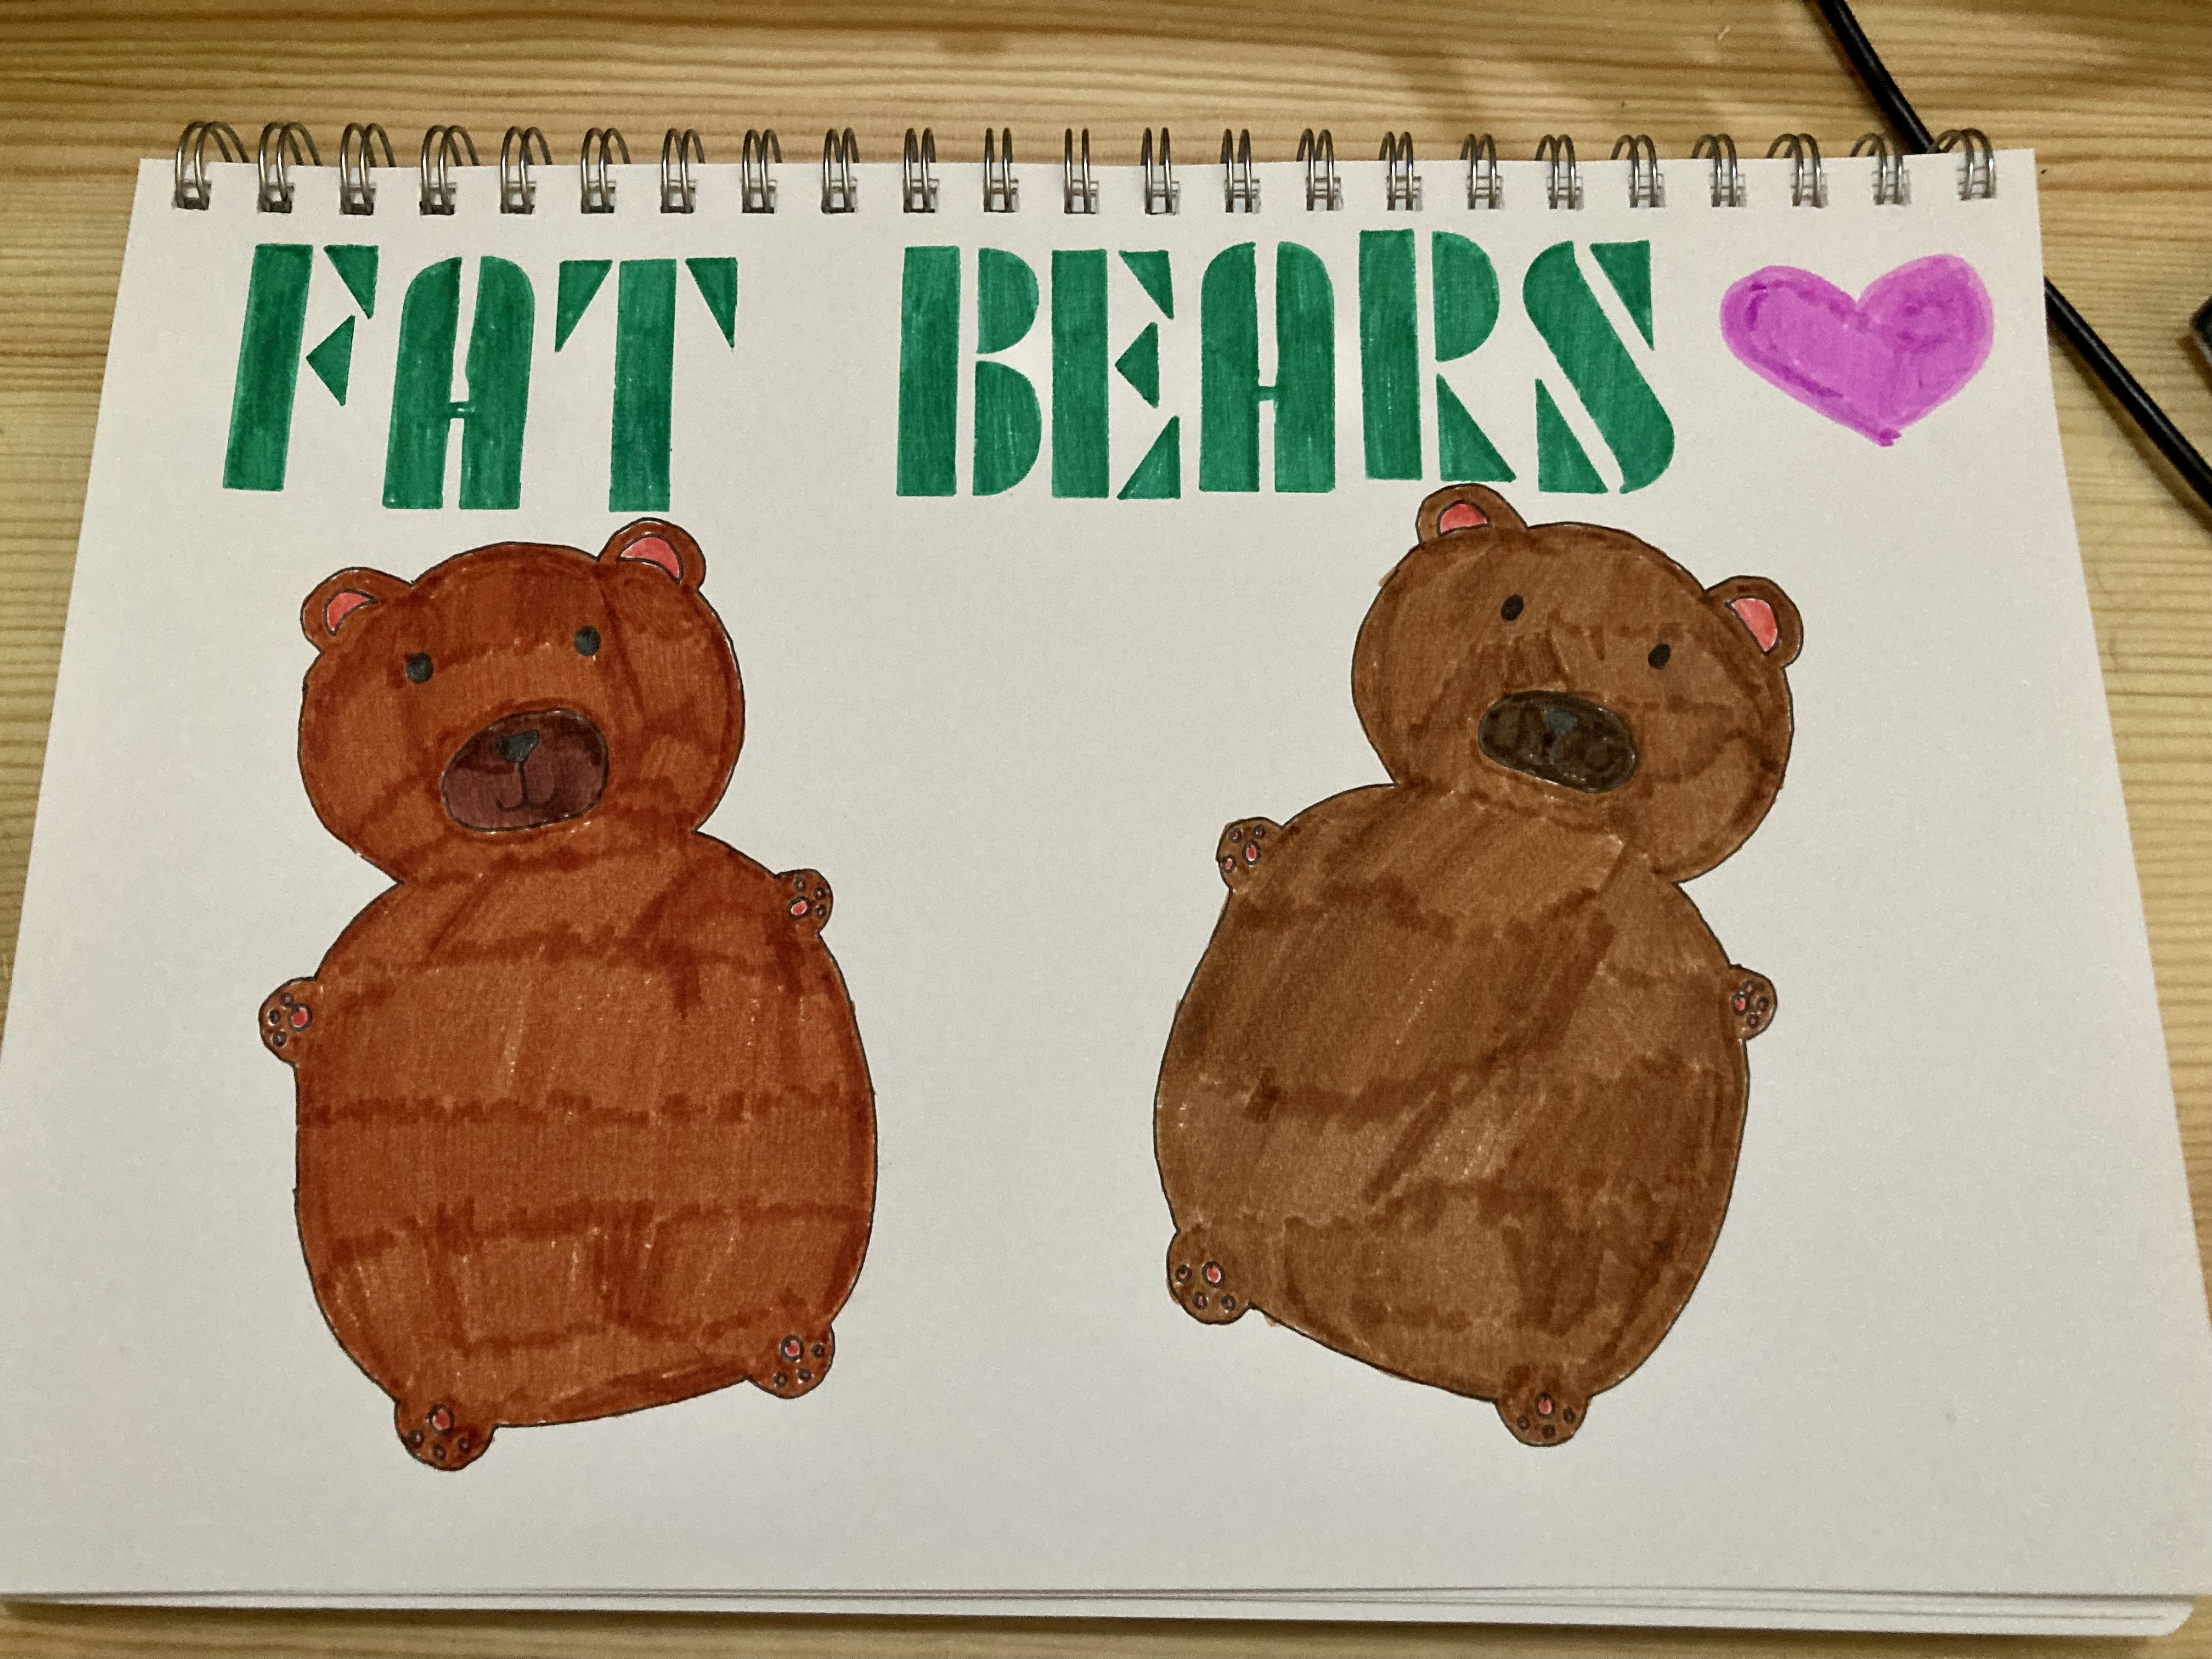 To far bears, made with a home-made stencil, under a heading which reads Fat Bears